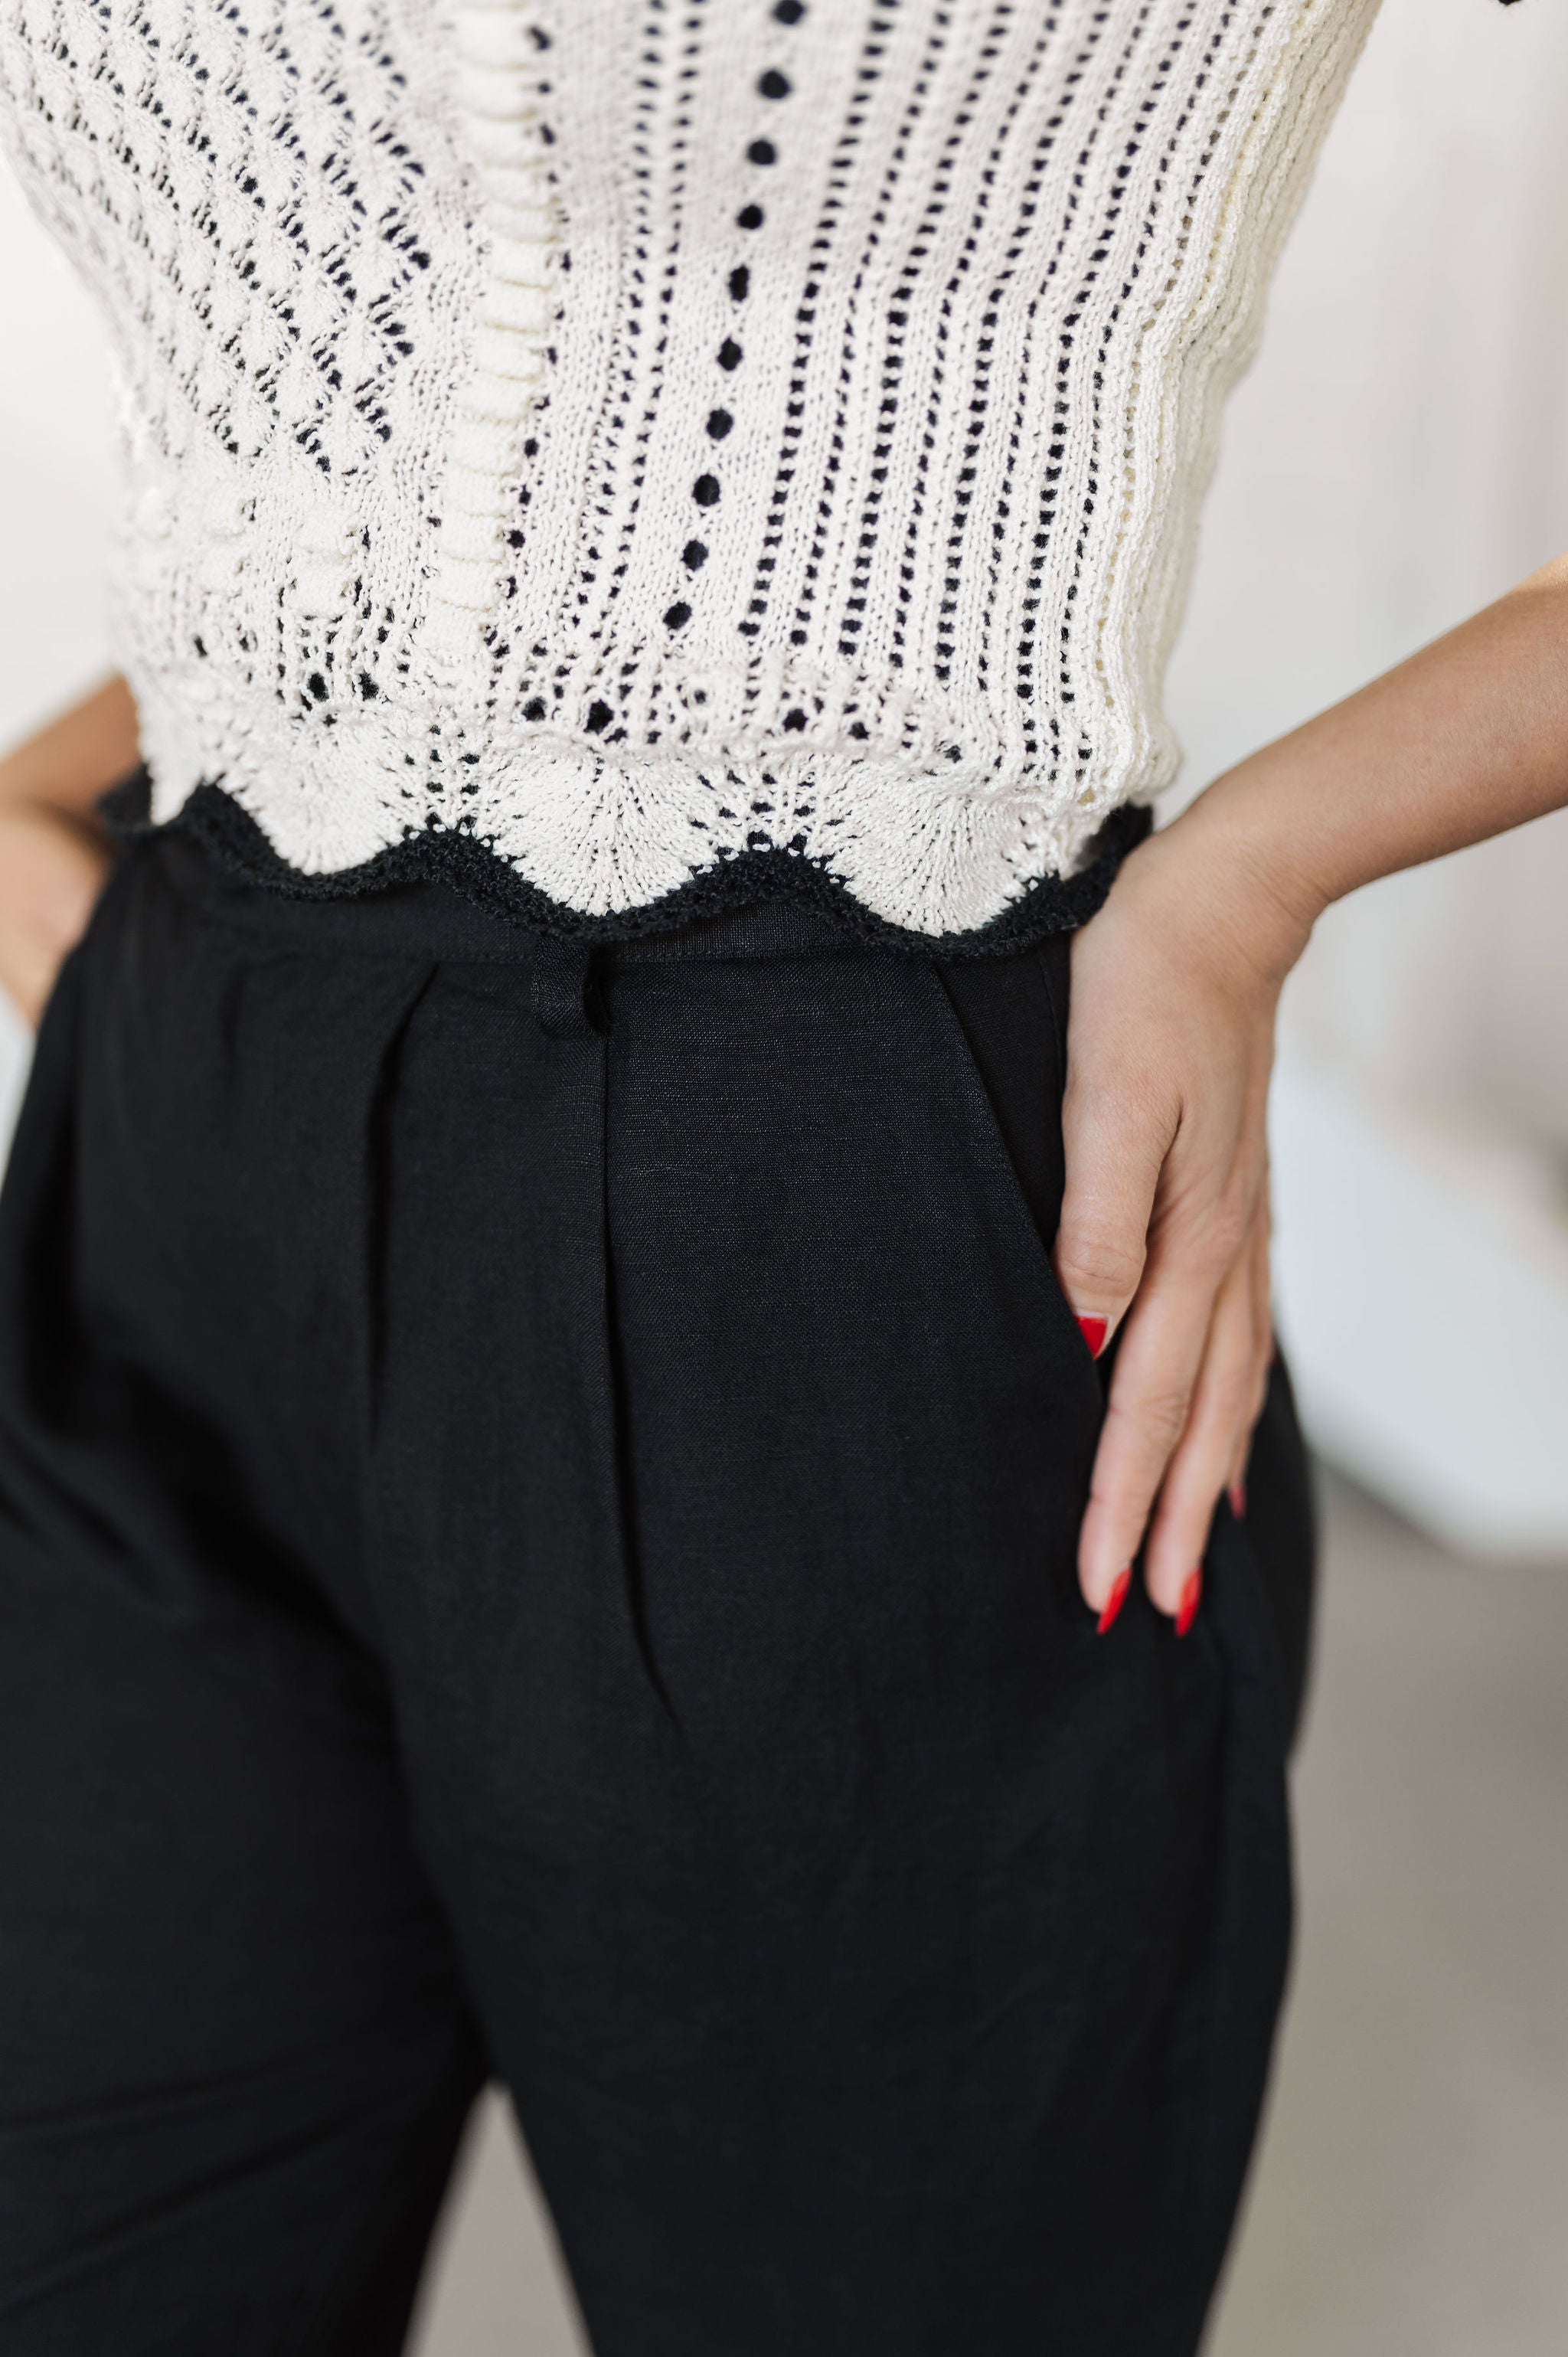 Up close view of Chloe Pleat Linen Pant in black with pleat front detail and side pocket.  